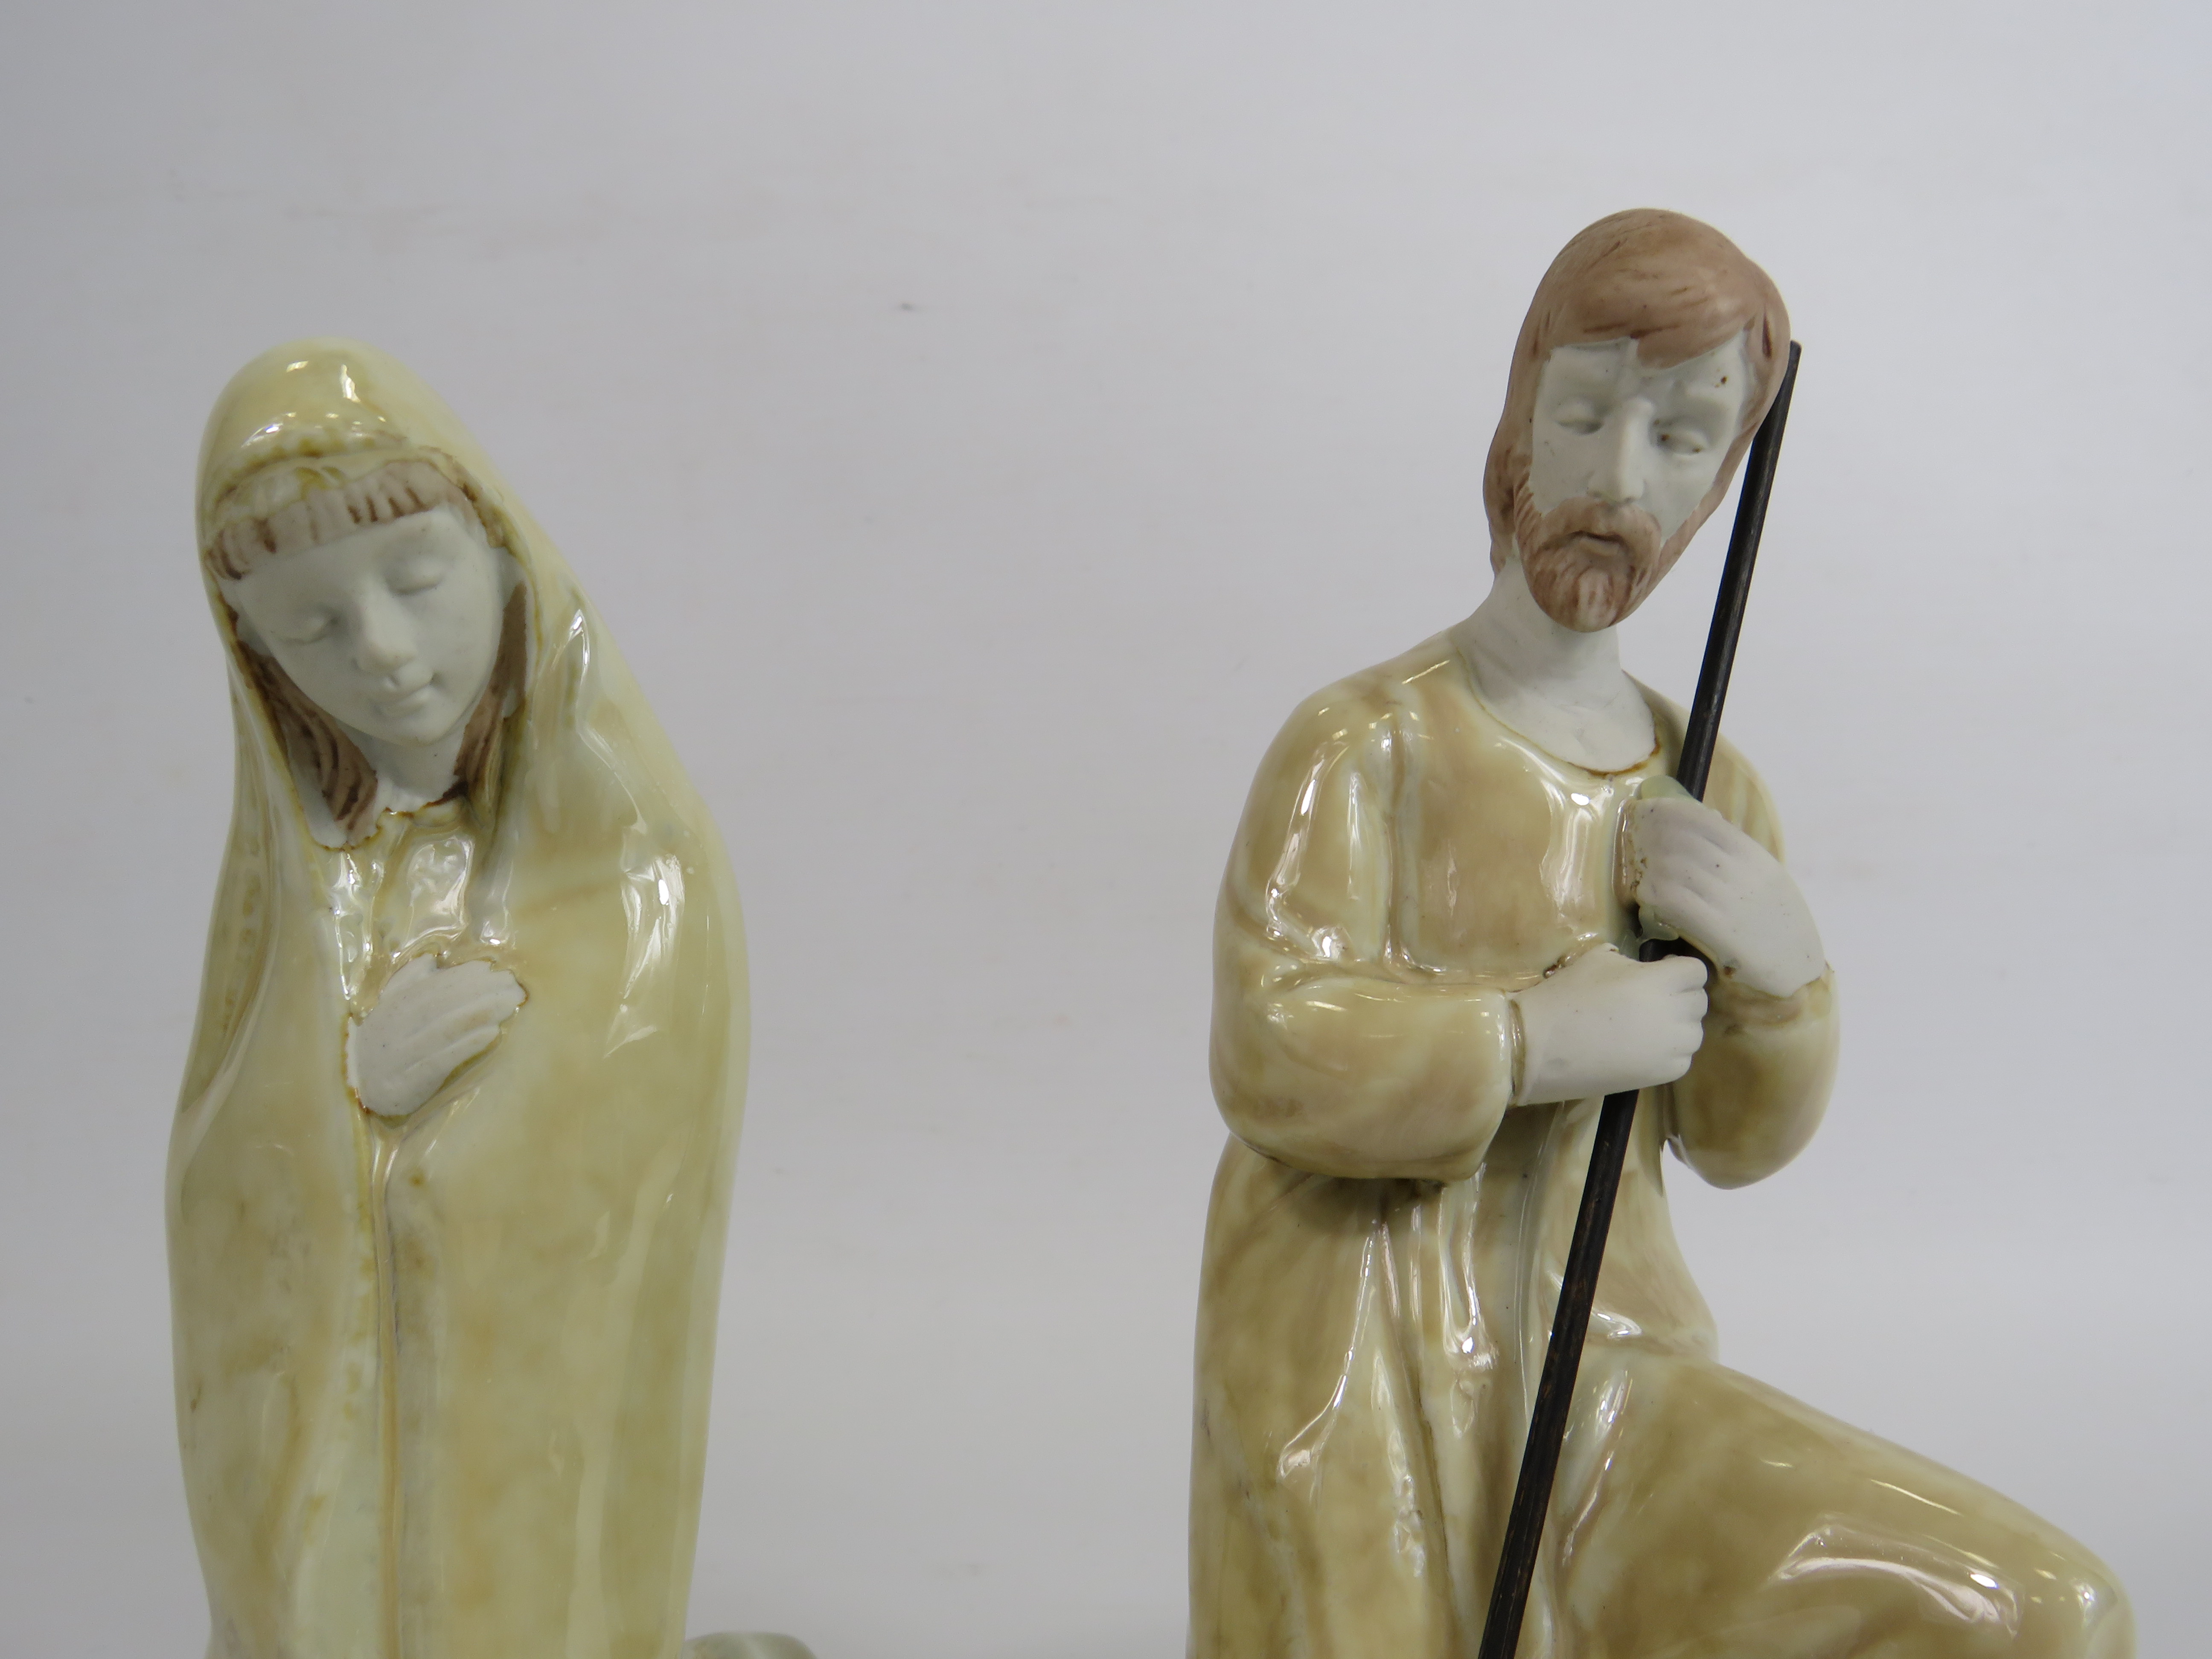 3 Ceramic figurines depiciting Joseph, Mary and Baby Jesus, the tallest stands 19.5cm. - Image 2 of 3